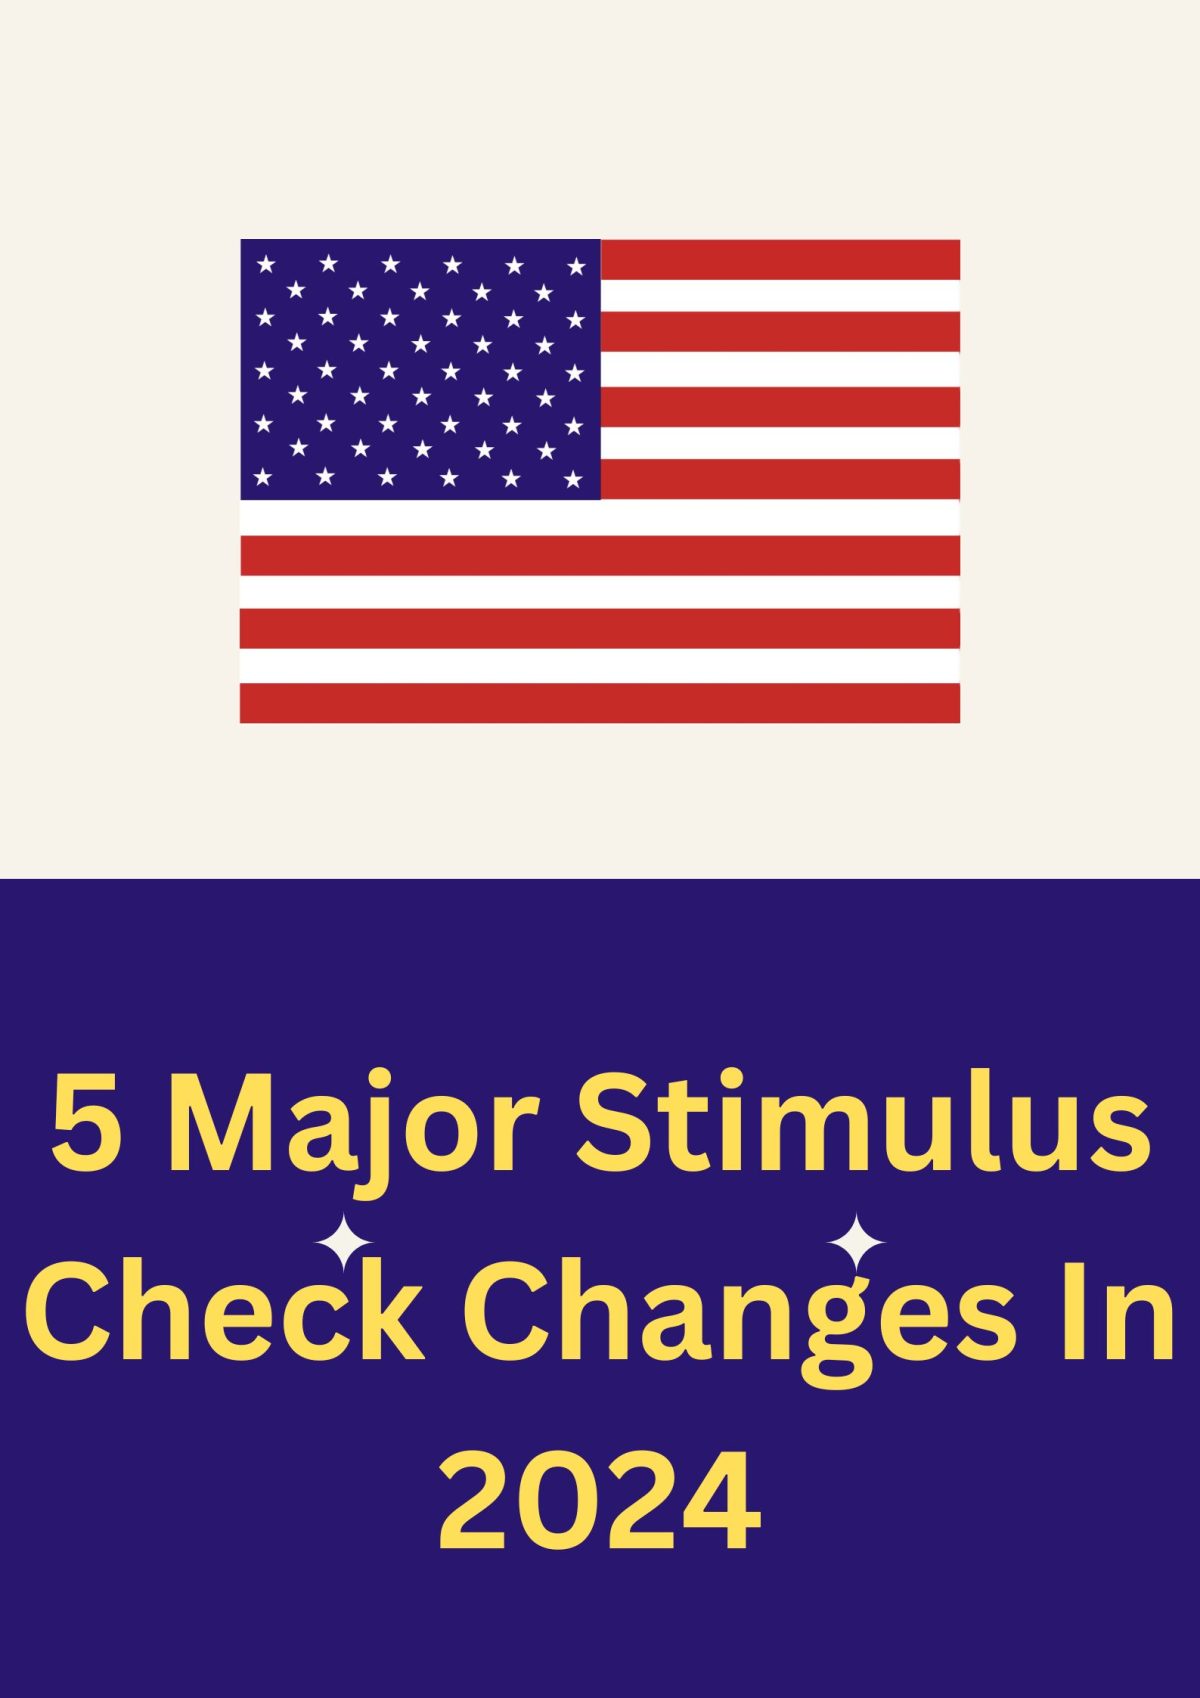 5 Major Stimulus Check Changes In 2024: SSI, SSDI, COLA, Social Security, Low Income Seniors